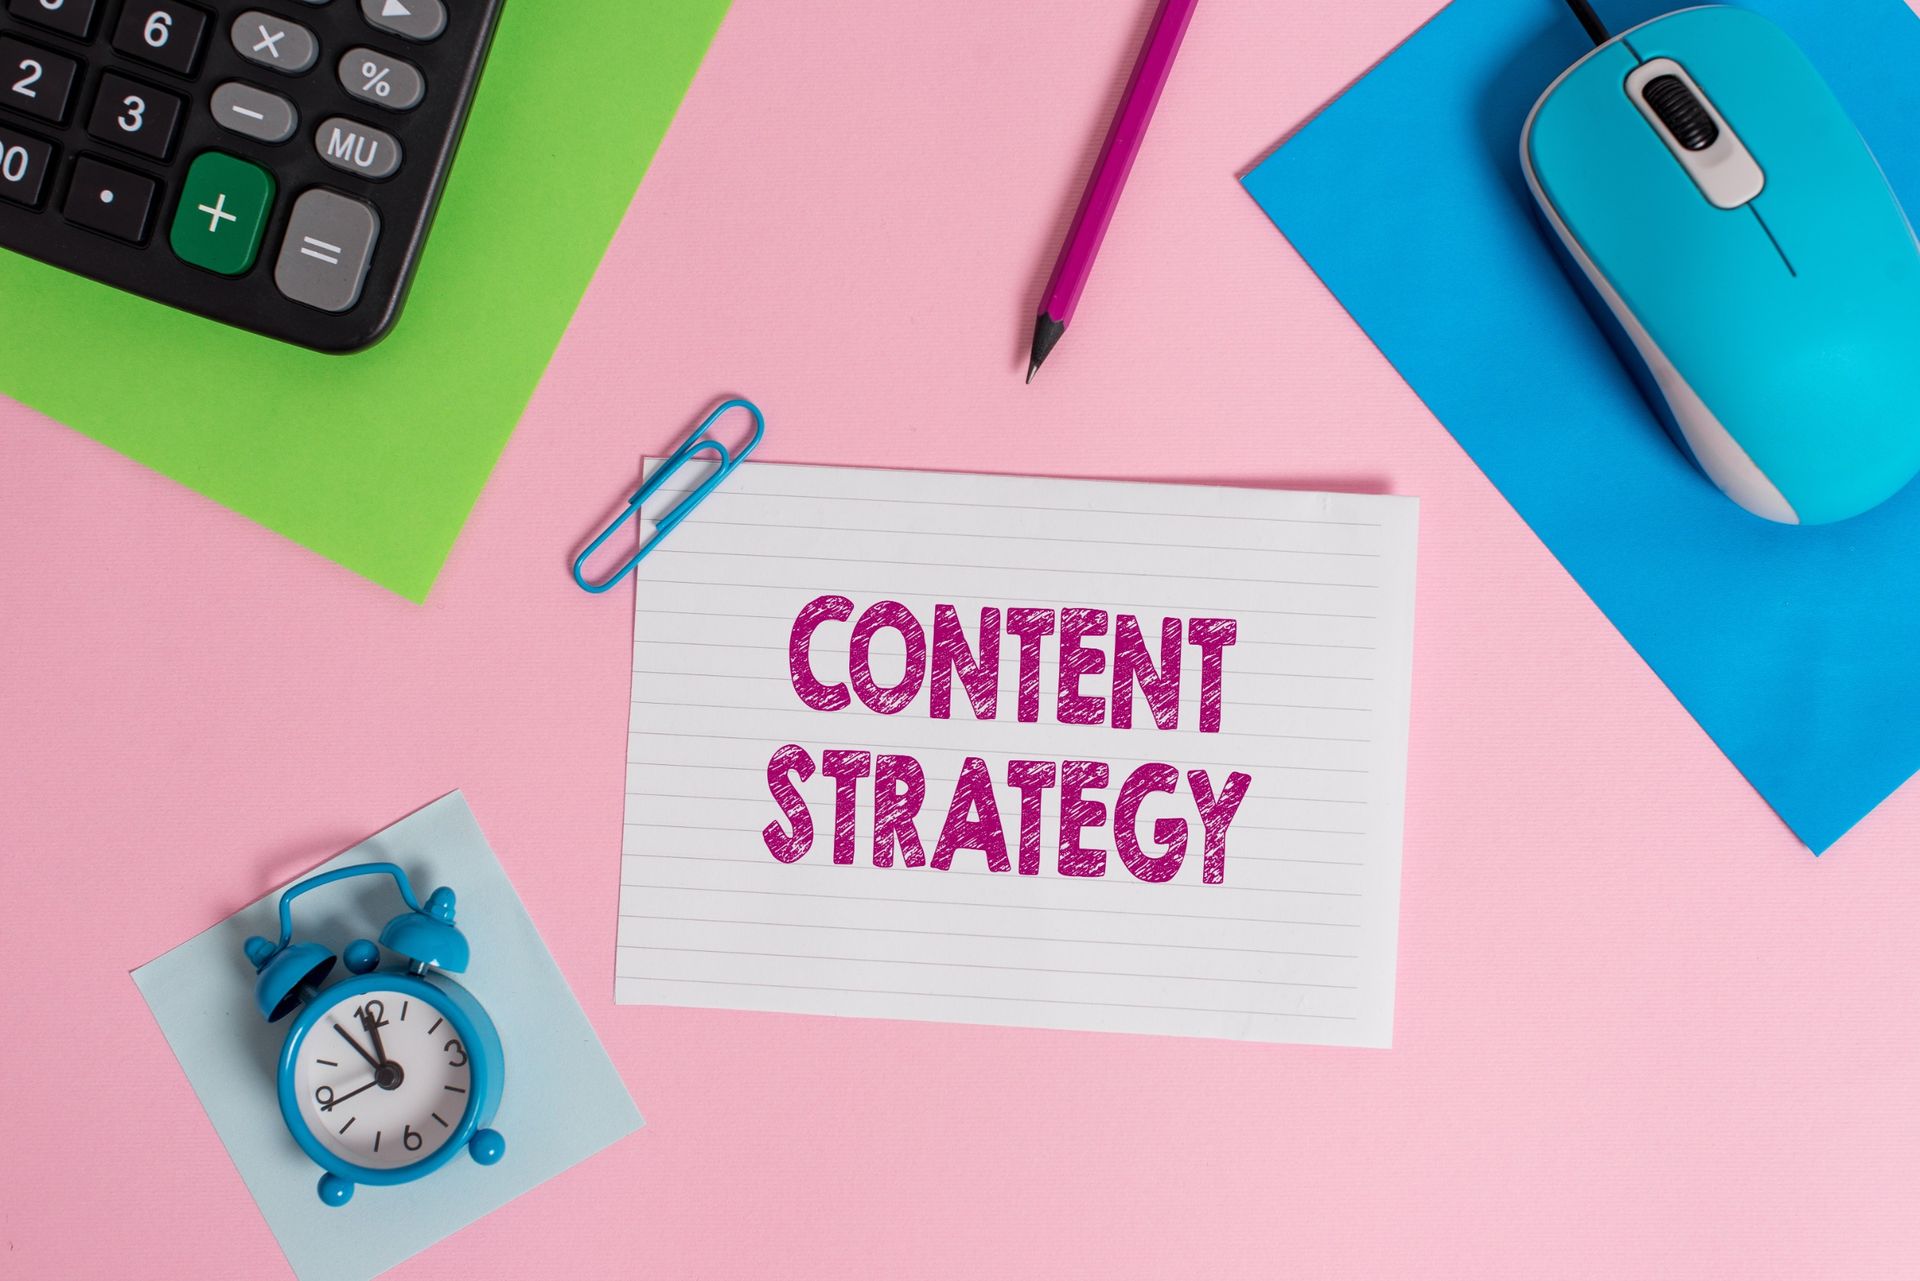 The Ultimate Guide to Content Marketing in 2023